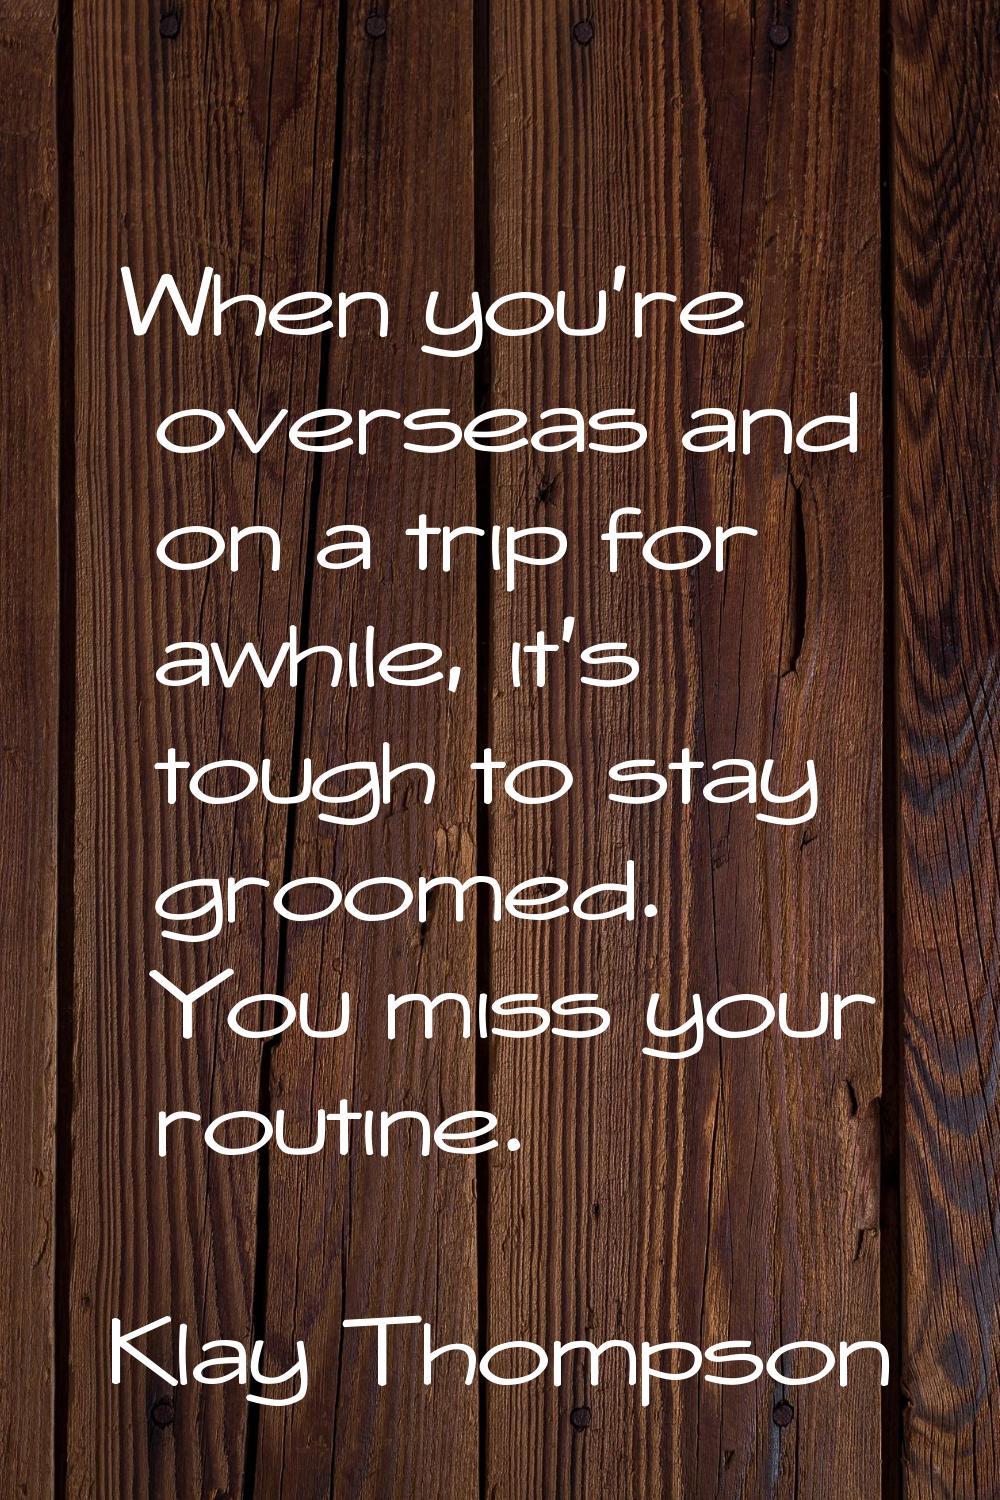 When you're overseas and on a trip for awhile, it's tough to stay groomed. You miss your routine.